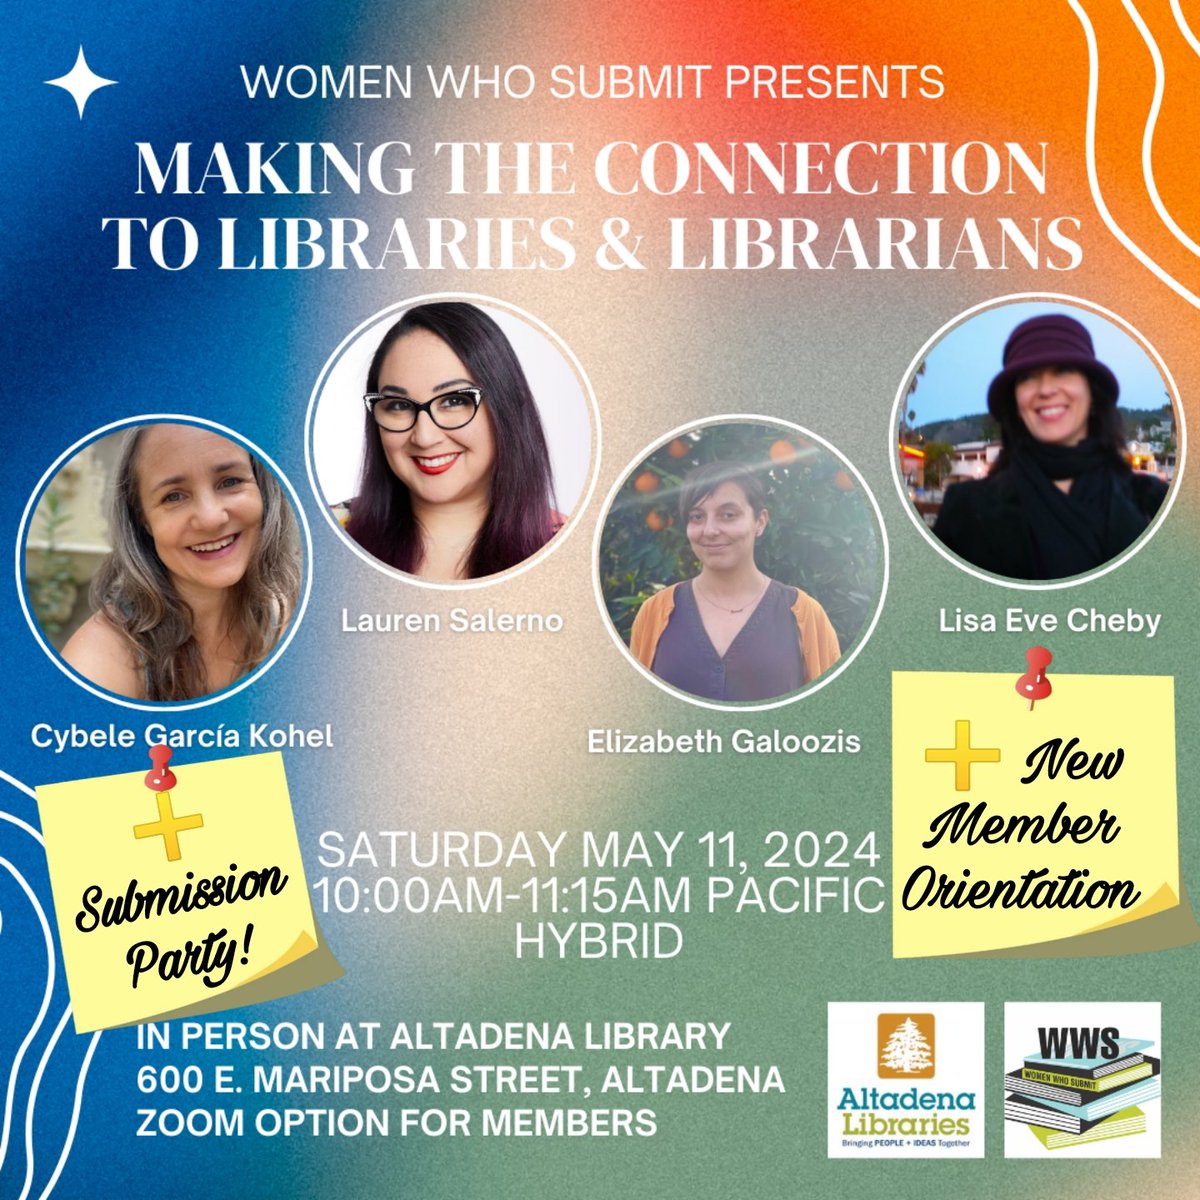 Your opportunity to join Women Who Submit as a new member in LA County! Sat., May 11, 2024, 10:00am PDT: “Making the Connection to Libraries & Librarians.” Our quarterly panel discussion and new member orientation/submission party! REGISTER HERE: womenwhosubmitlit.org/workshops/